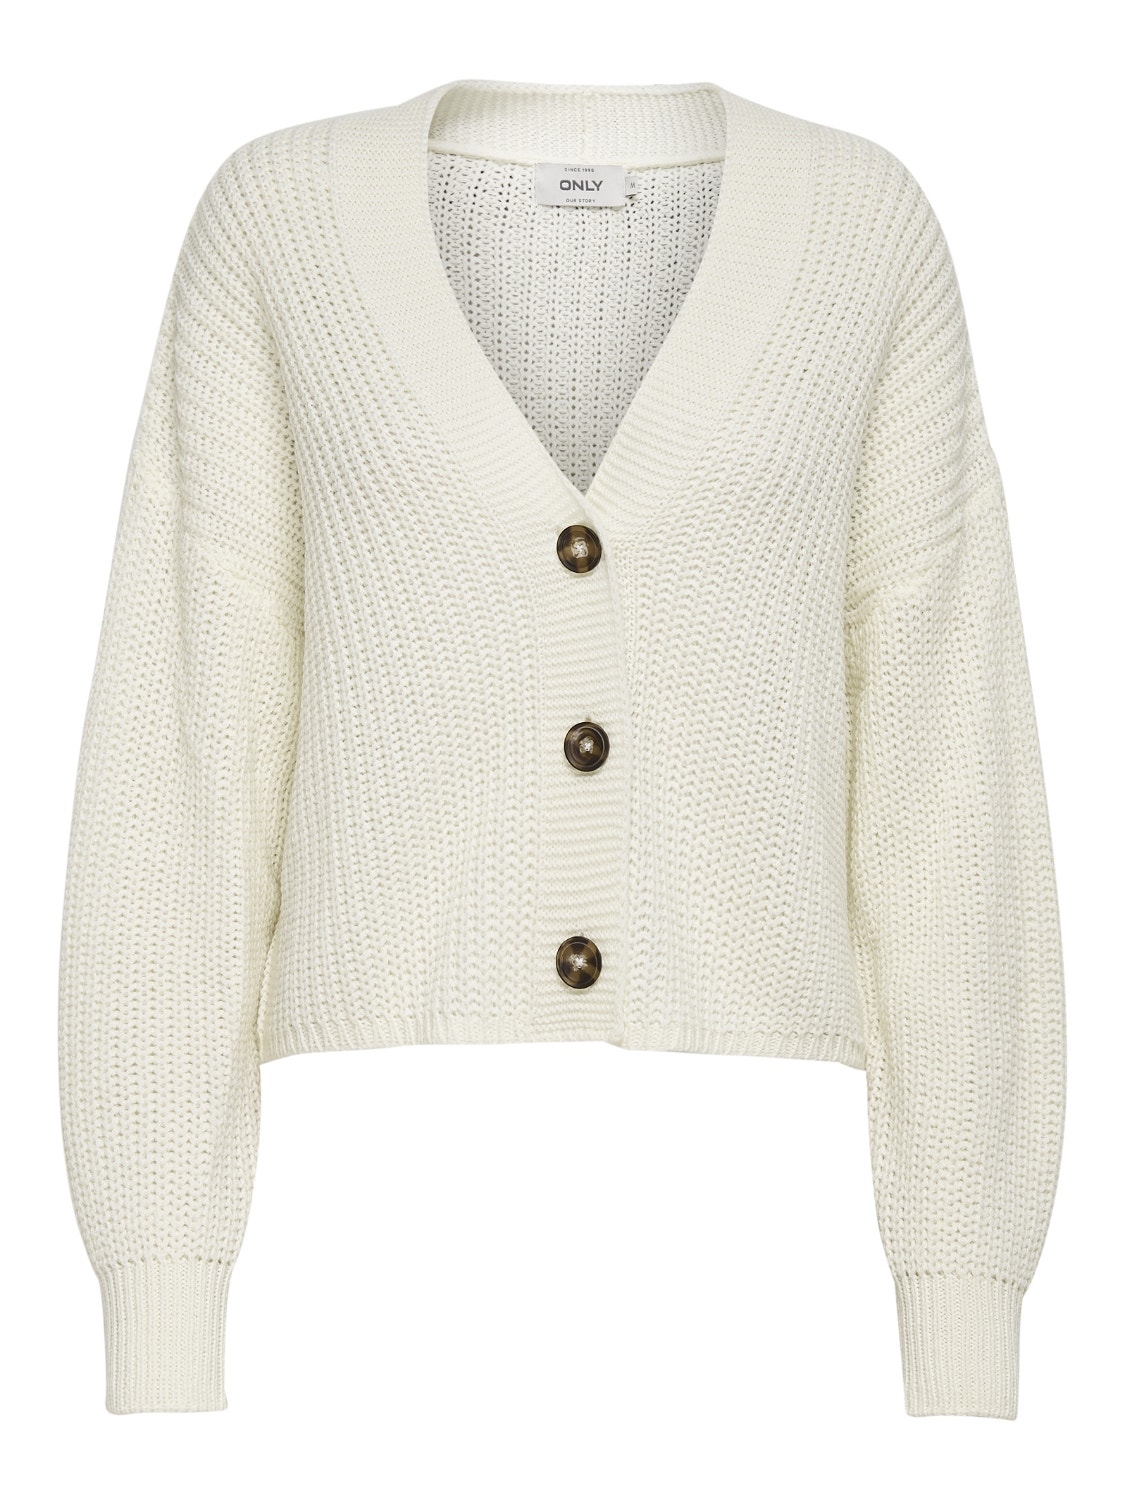 ONLY Texture Cardigan en maille -Jet Stream - 15211521